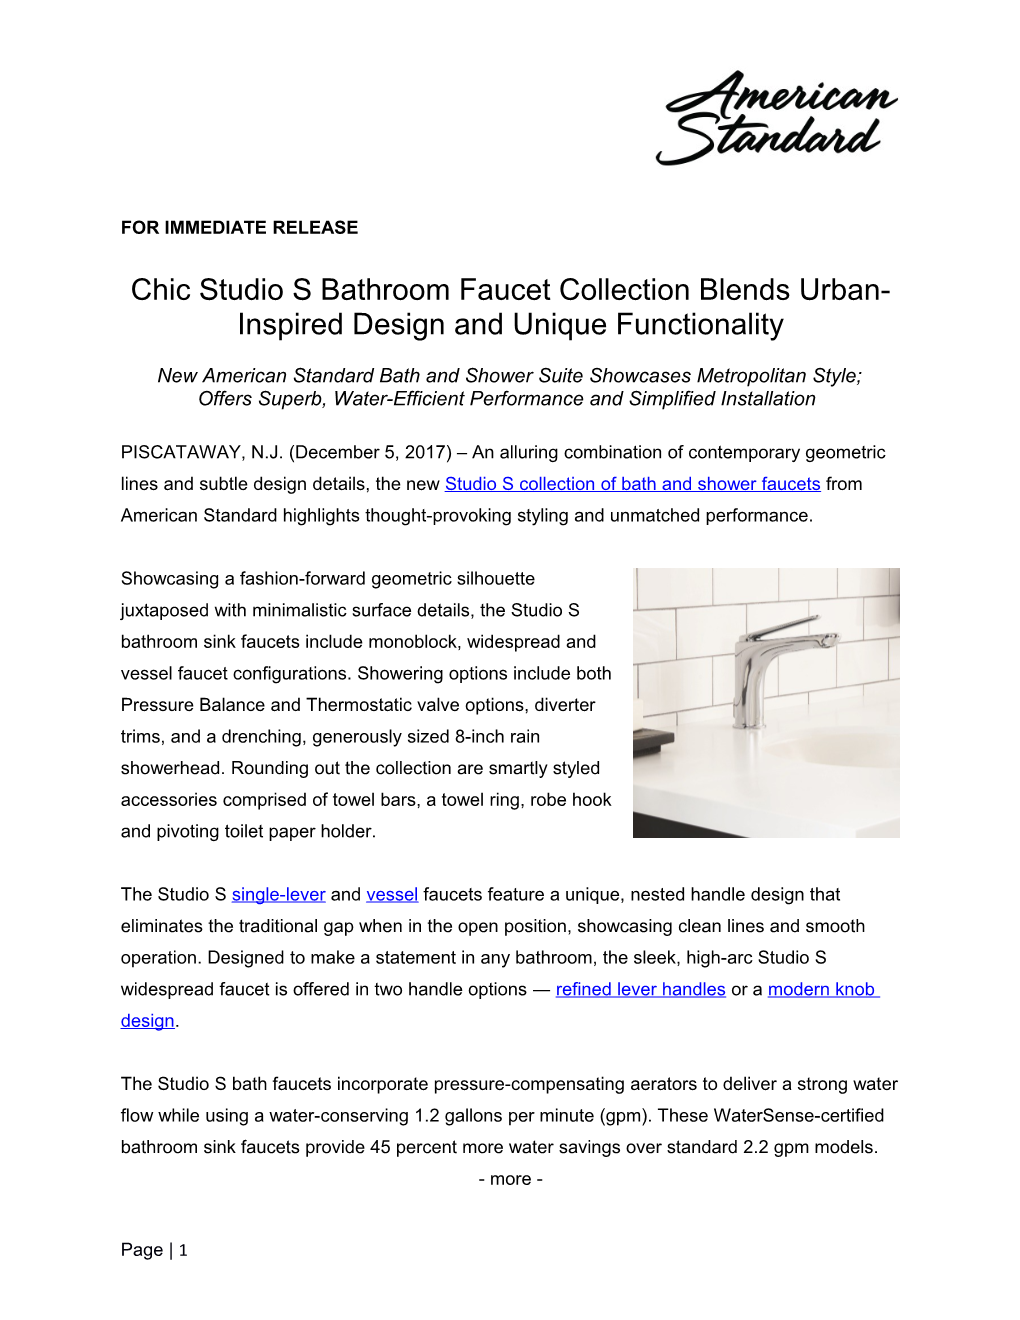 Chic Studio S Bathroom Faucet Collection Blends Urban-Inspired Design and Unique Functionality